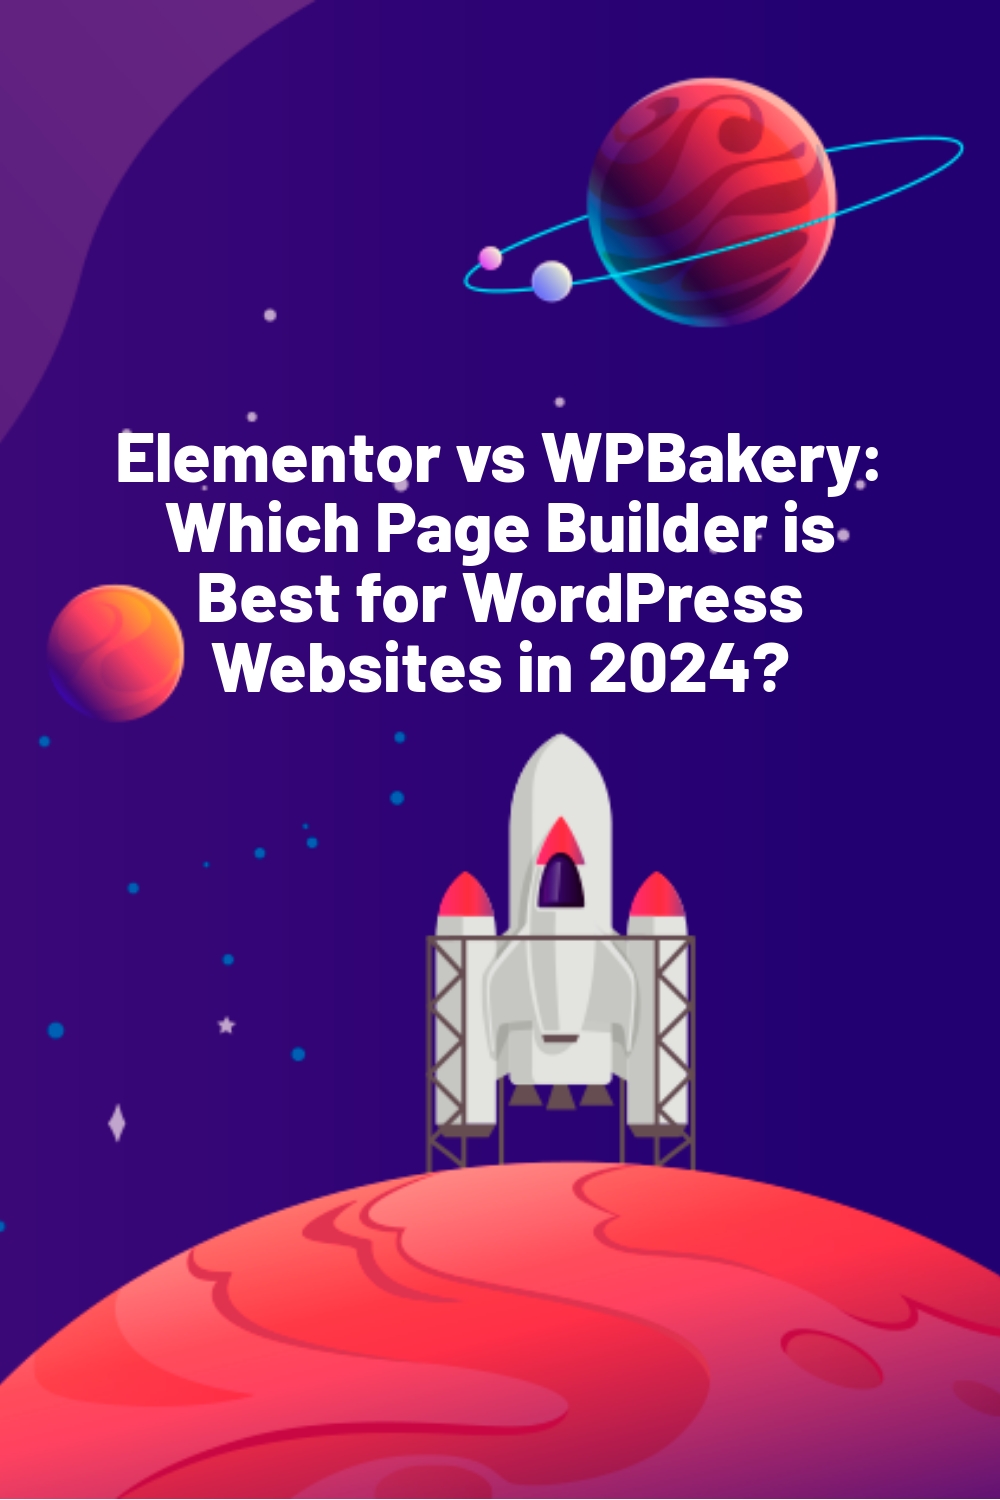 Elementor vs WPBakery: Which Page Builder is Best for WordPress Websites in 2024?